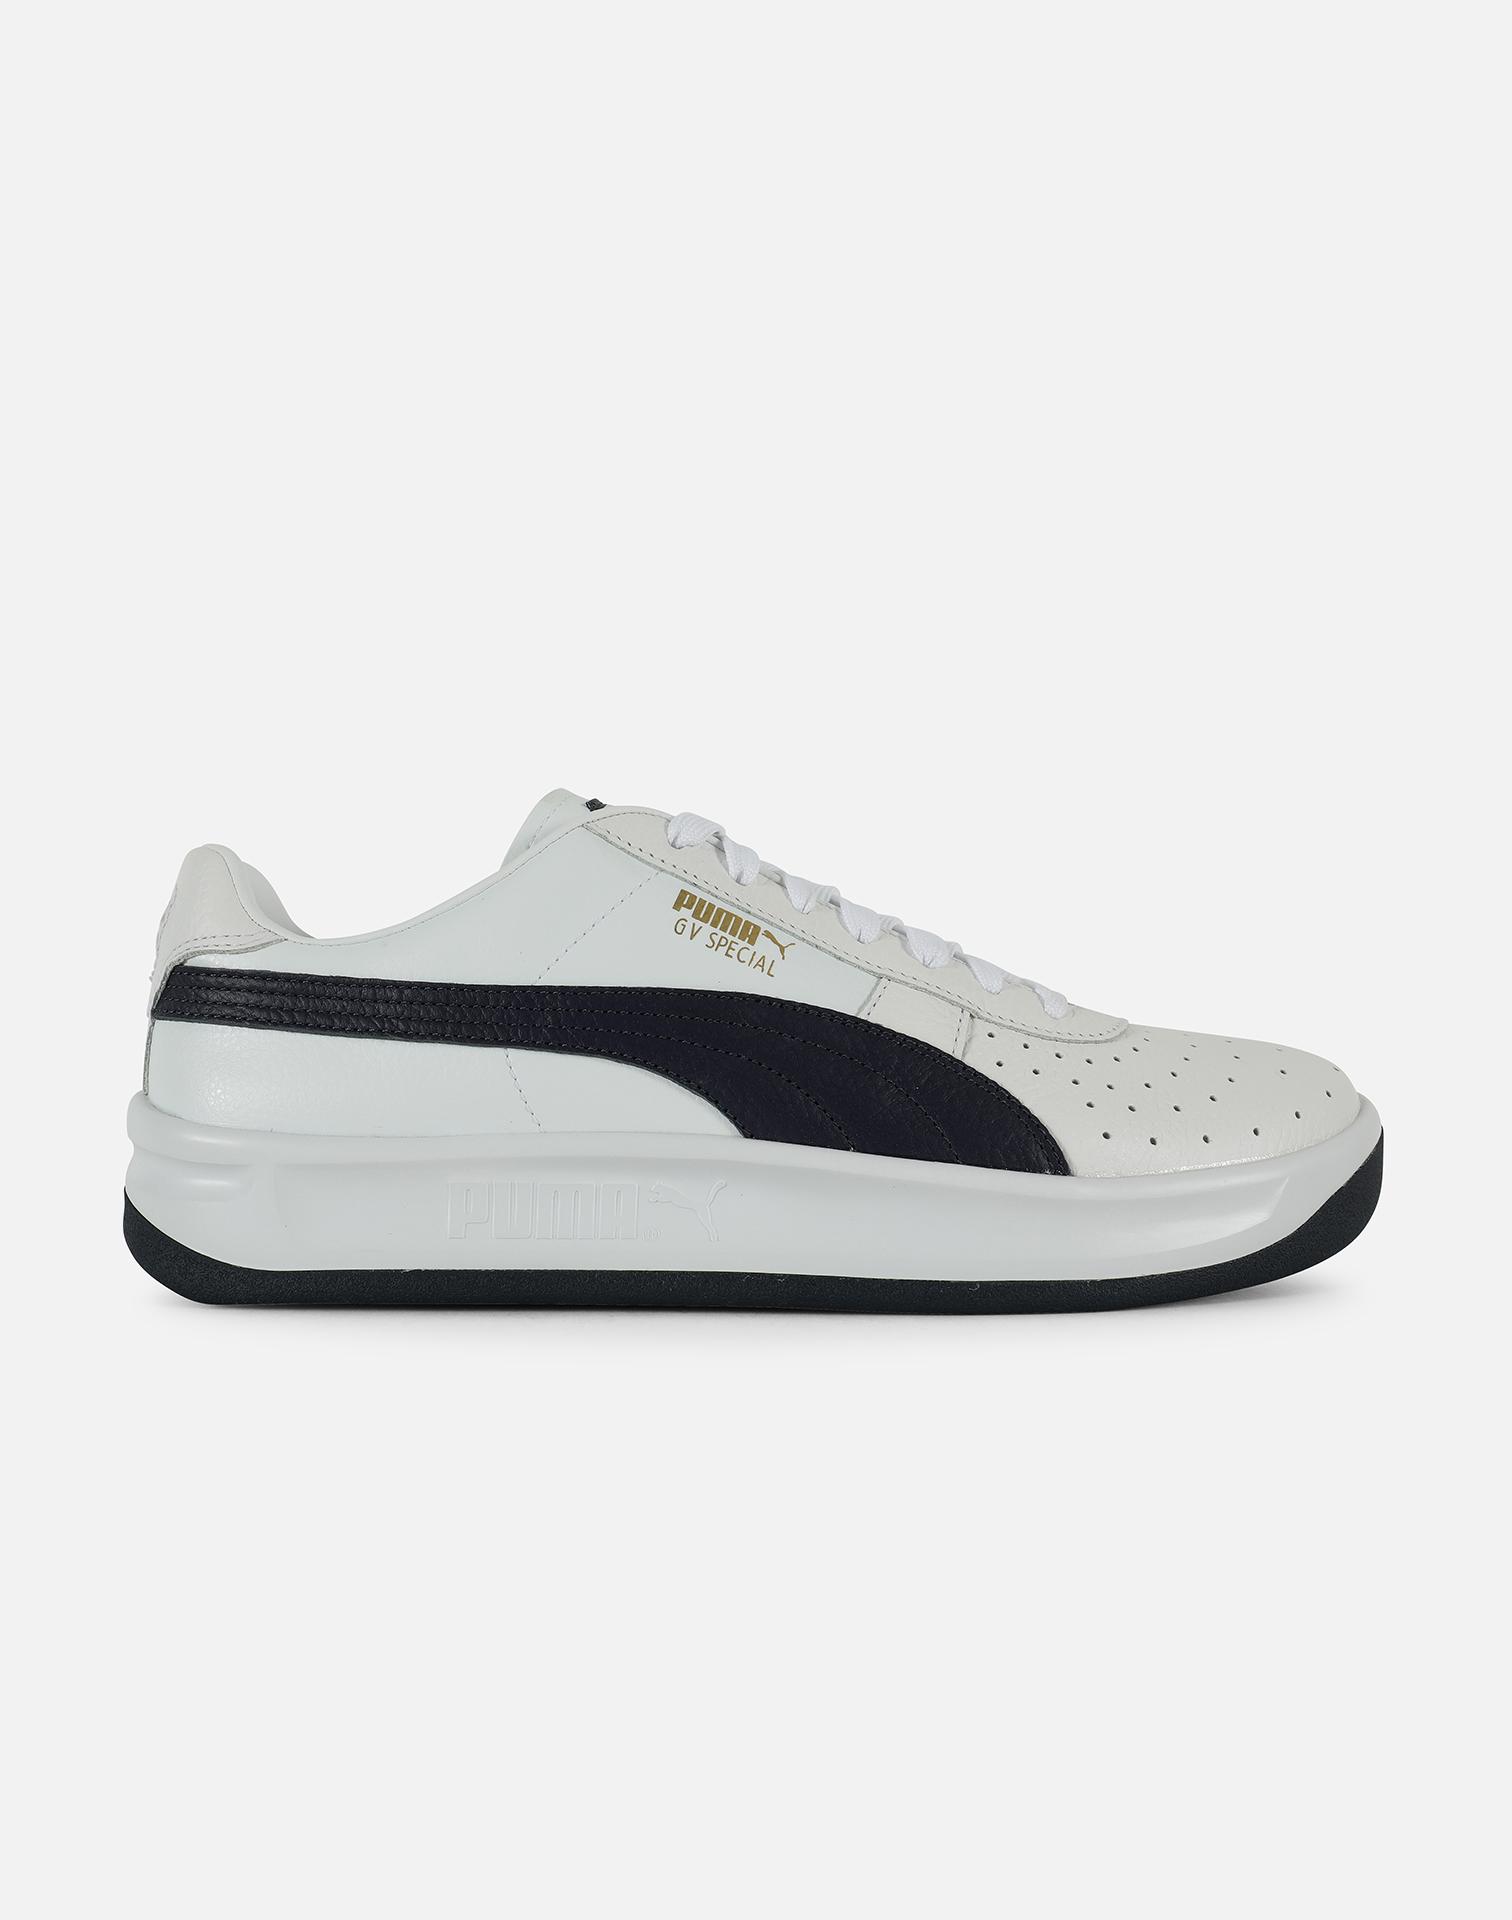 PUMA Leather Gv Special+ for Men - Lyst